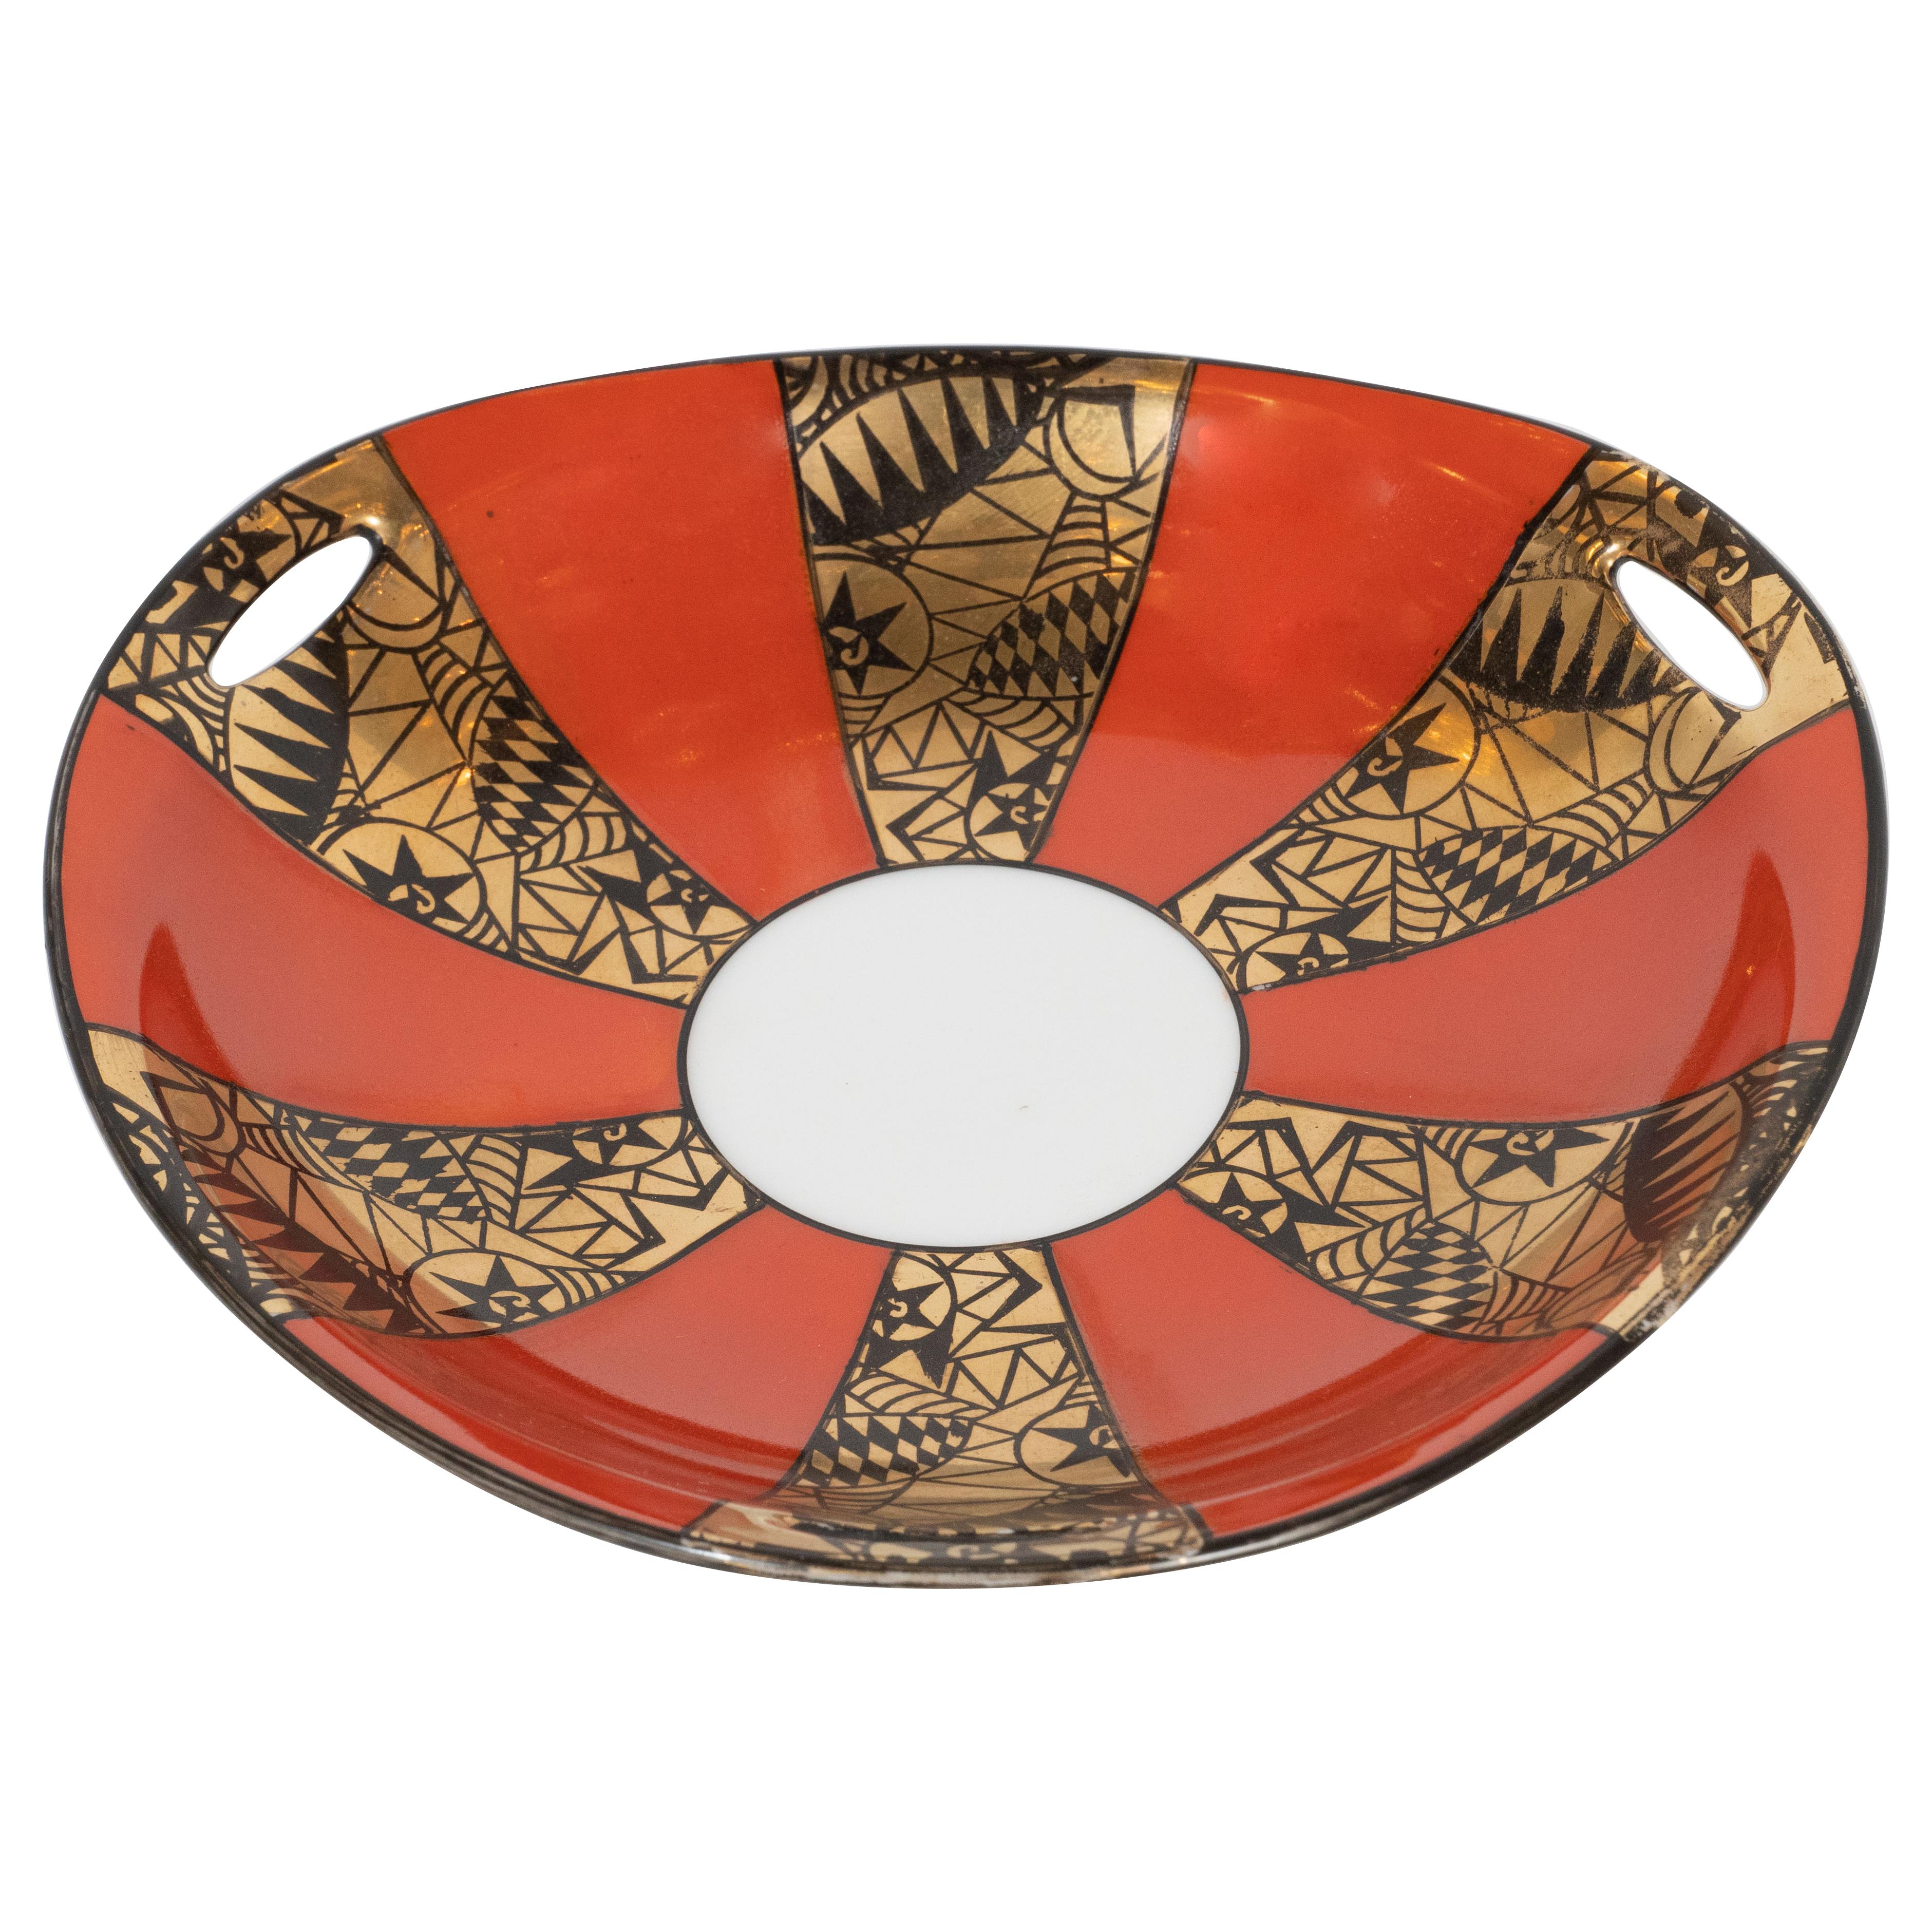 Mid-20th Century Art Deco Gold/Burnt Persimmon Porcelain Dish by Noritake with Cubist Detailing